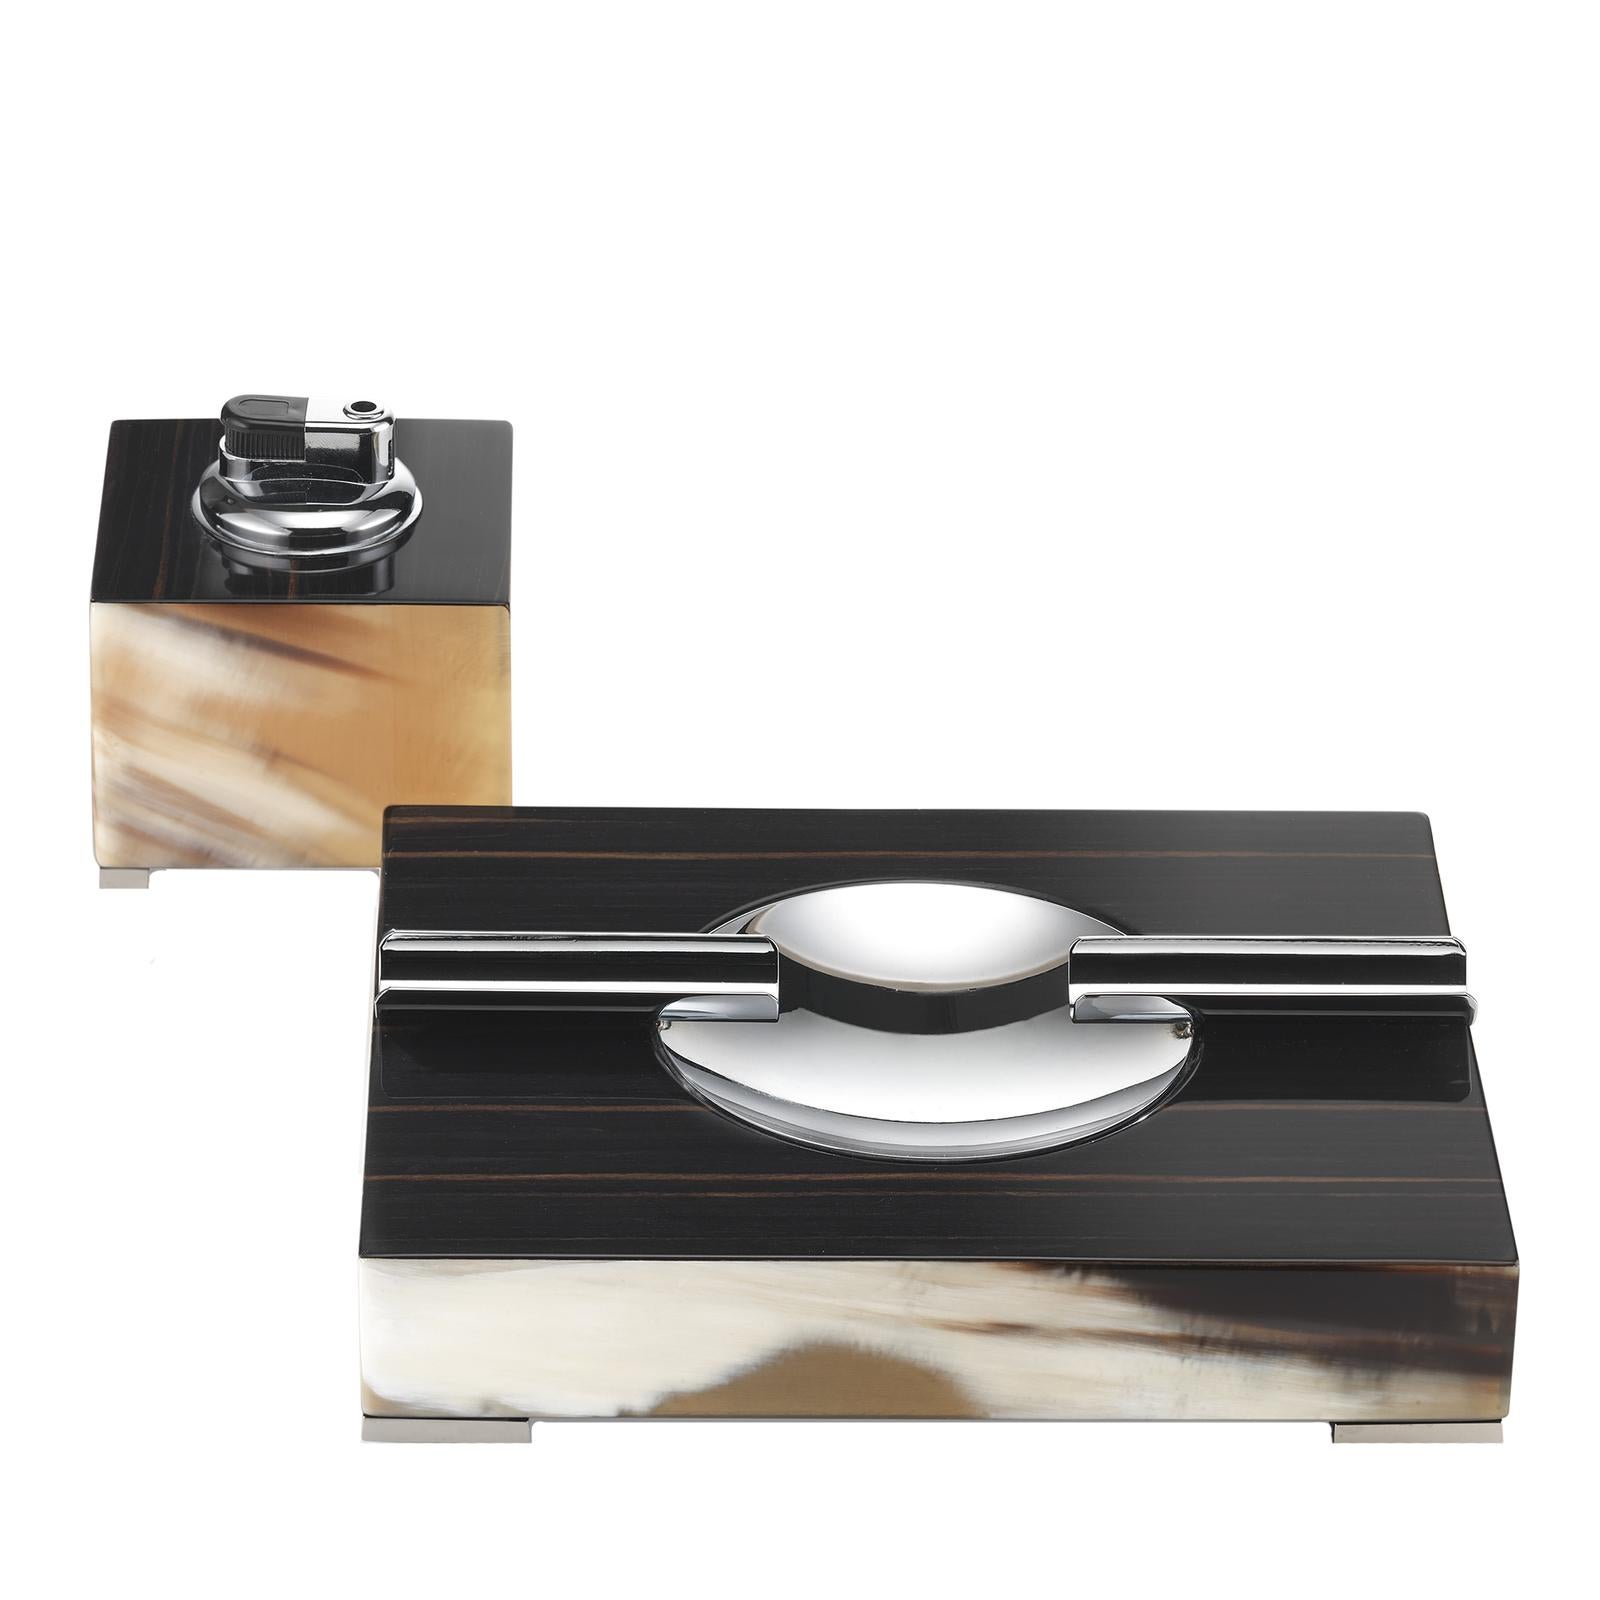 A dramatic accent to any modern living room decor, this square lighter and ash tray set will elevate any coffee table or desk surface with its timeless allure. Modern-inspired with a touch of vintage flair, this set boasts a striking combination of